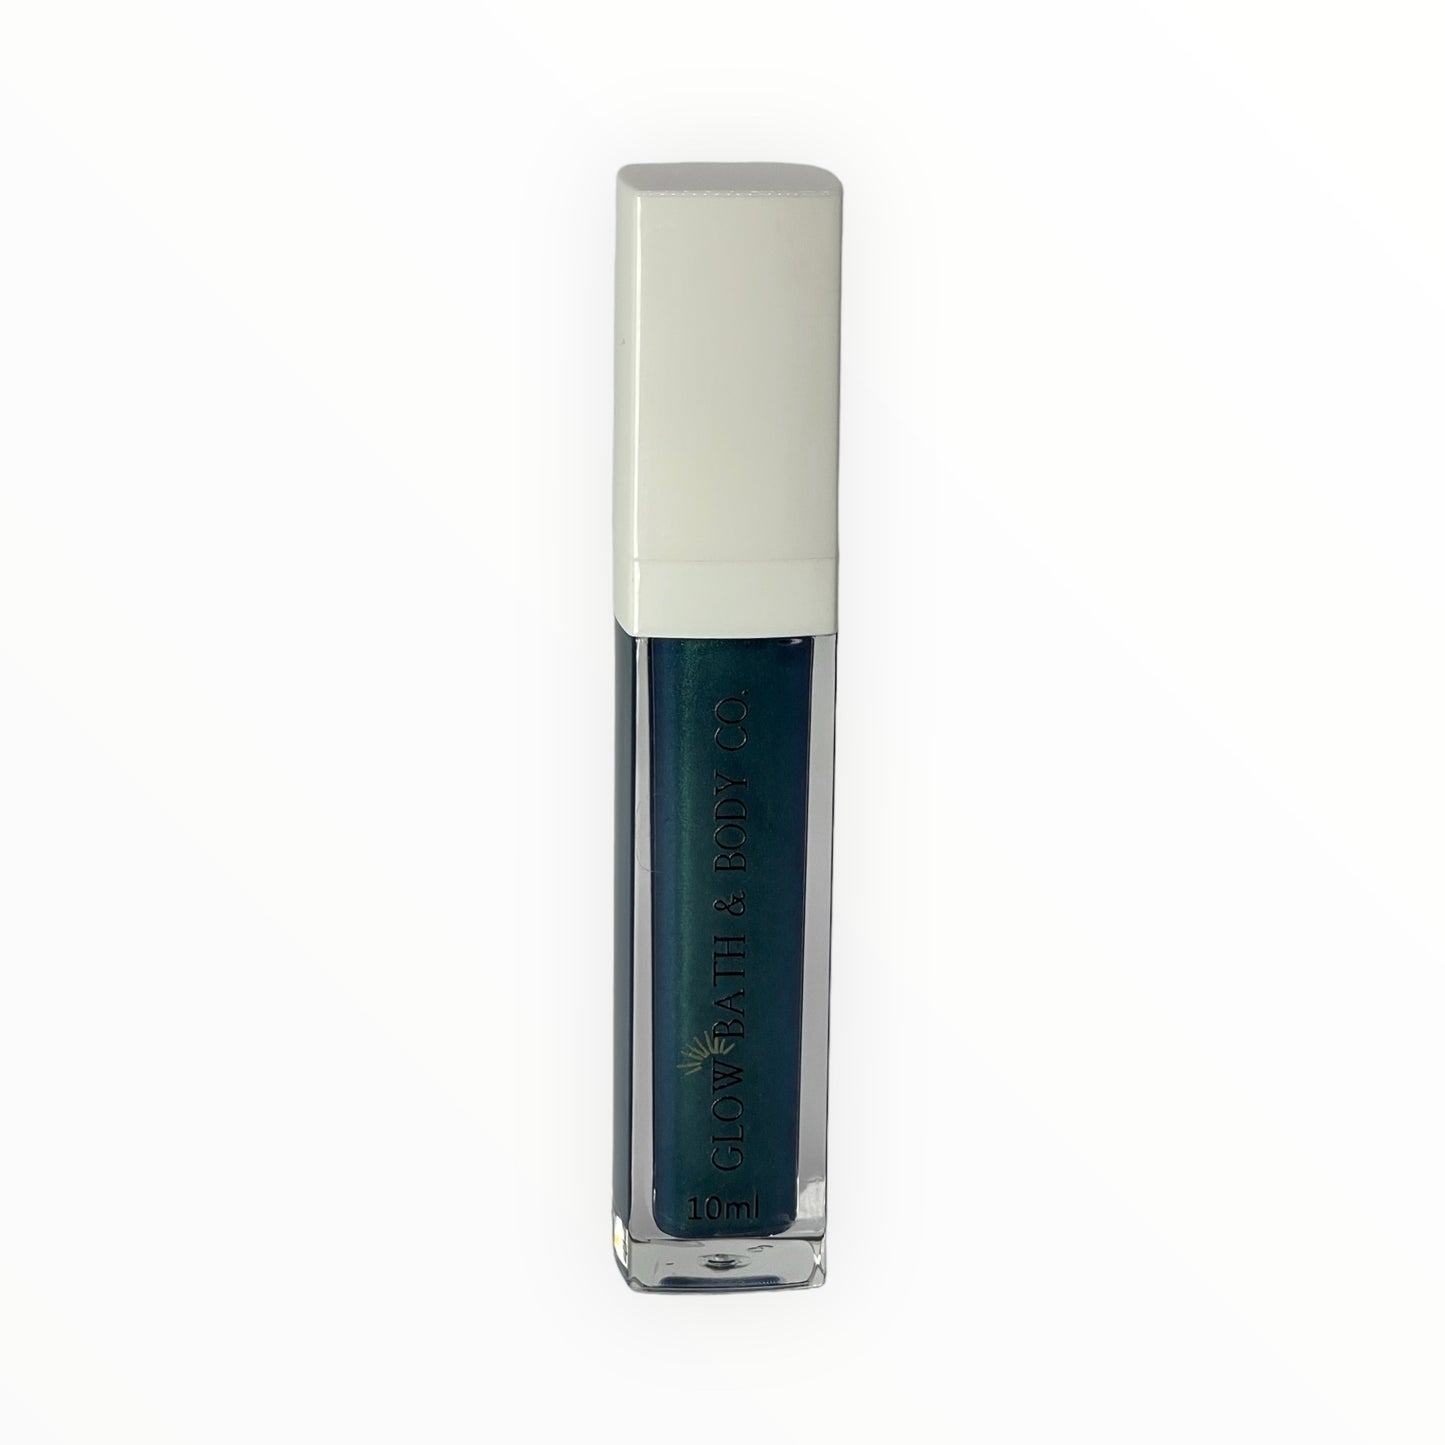 "Illusion" Color Changing Lip Gloss